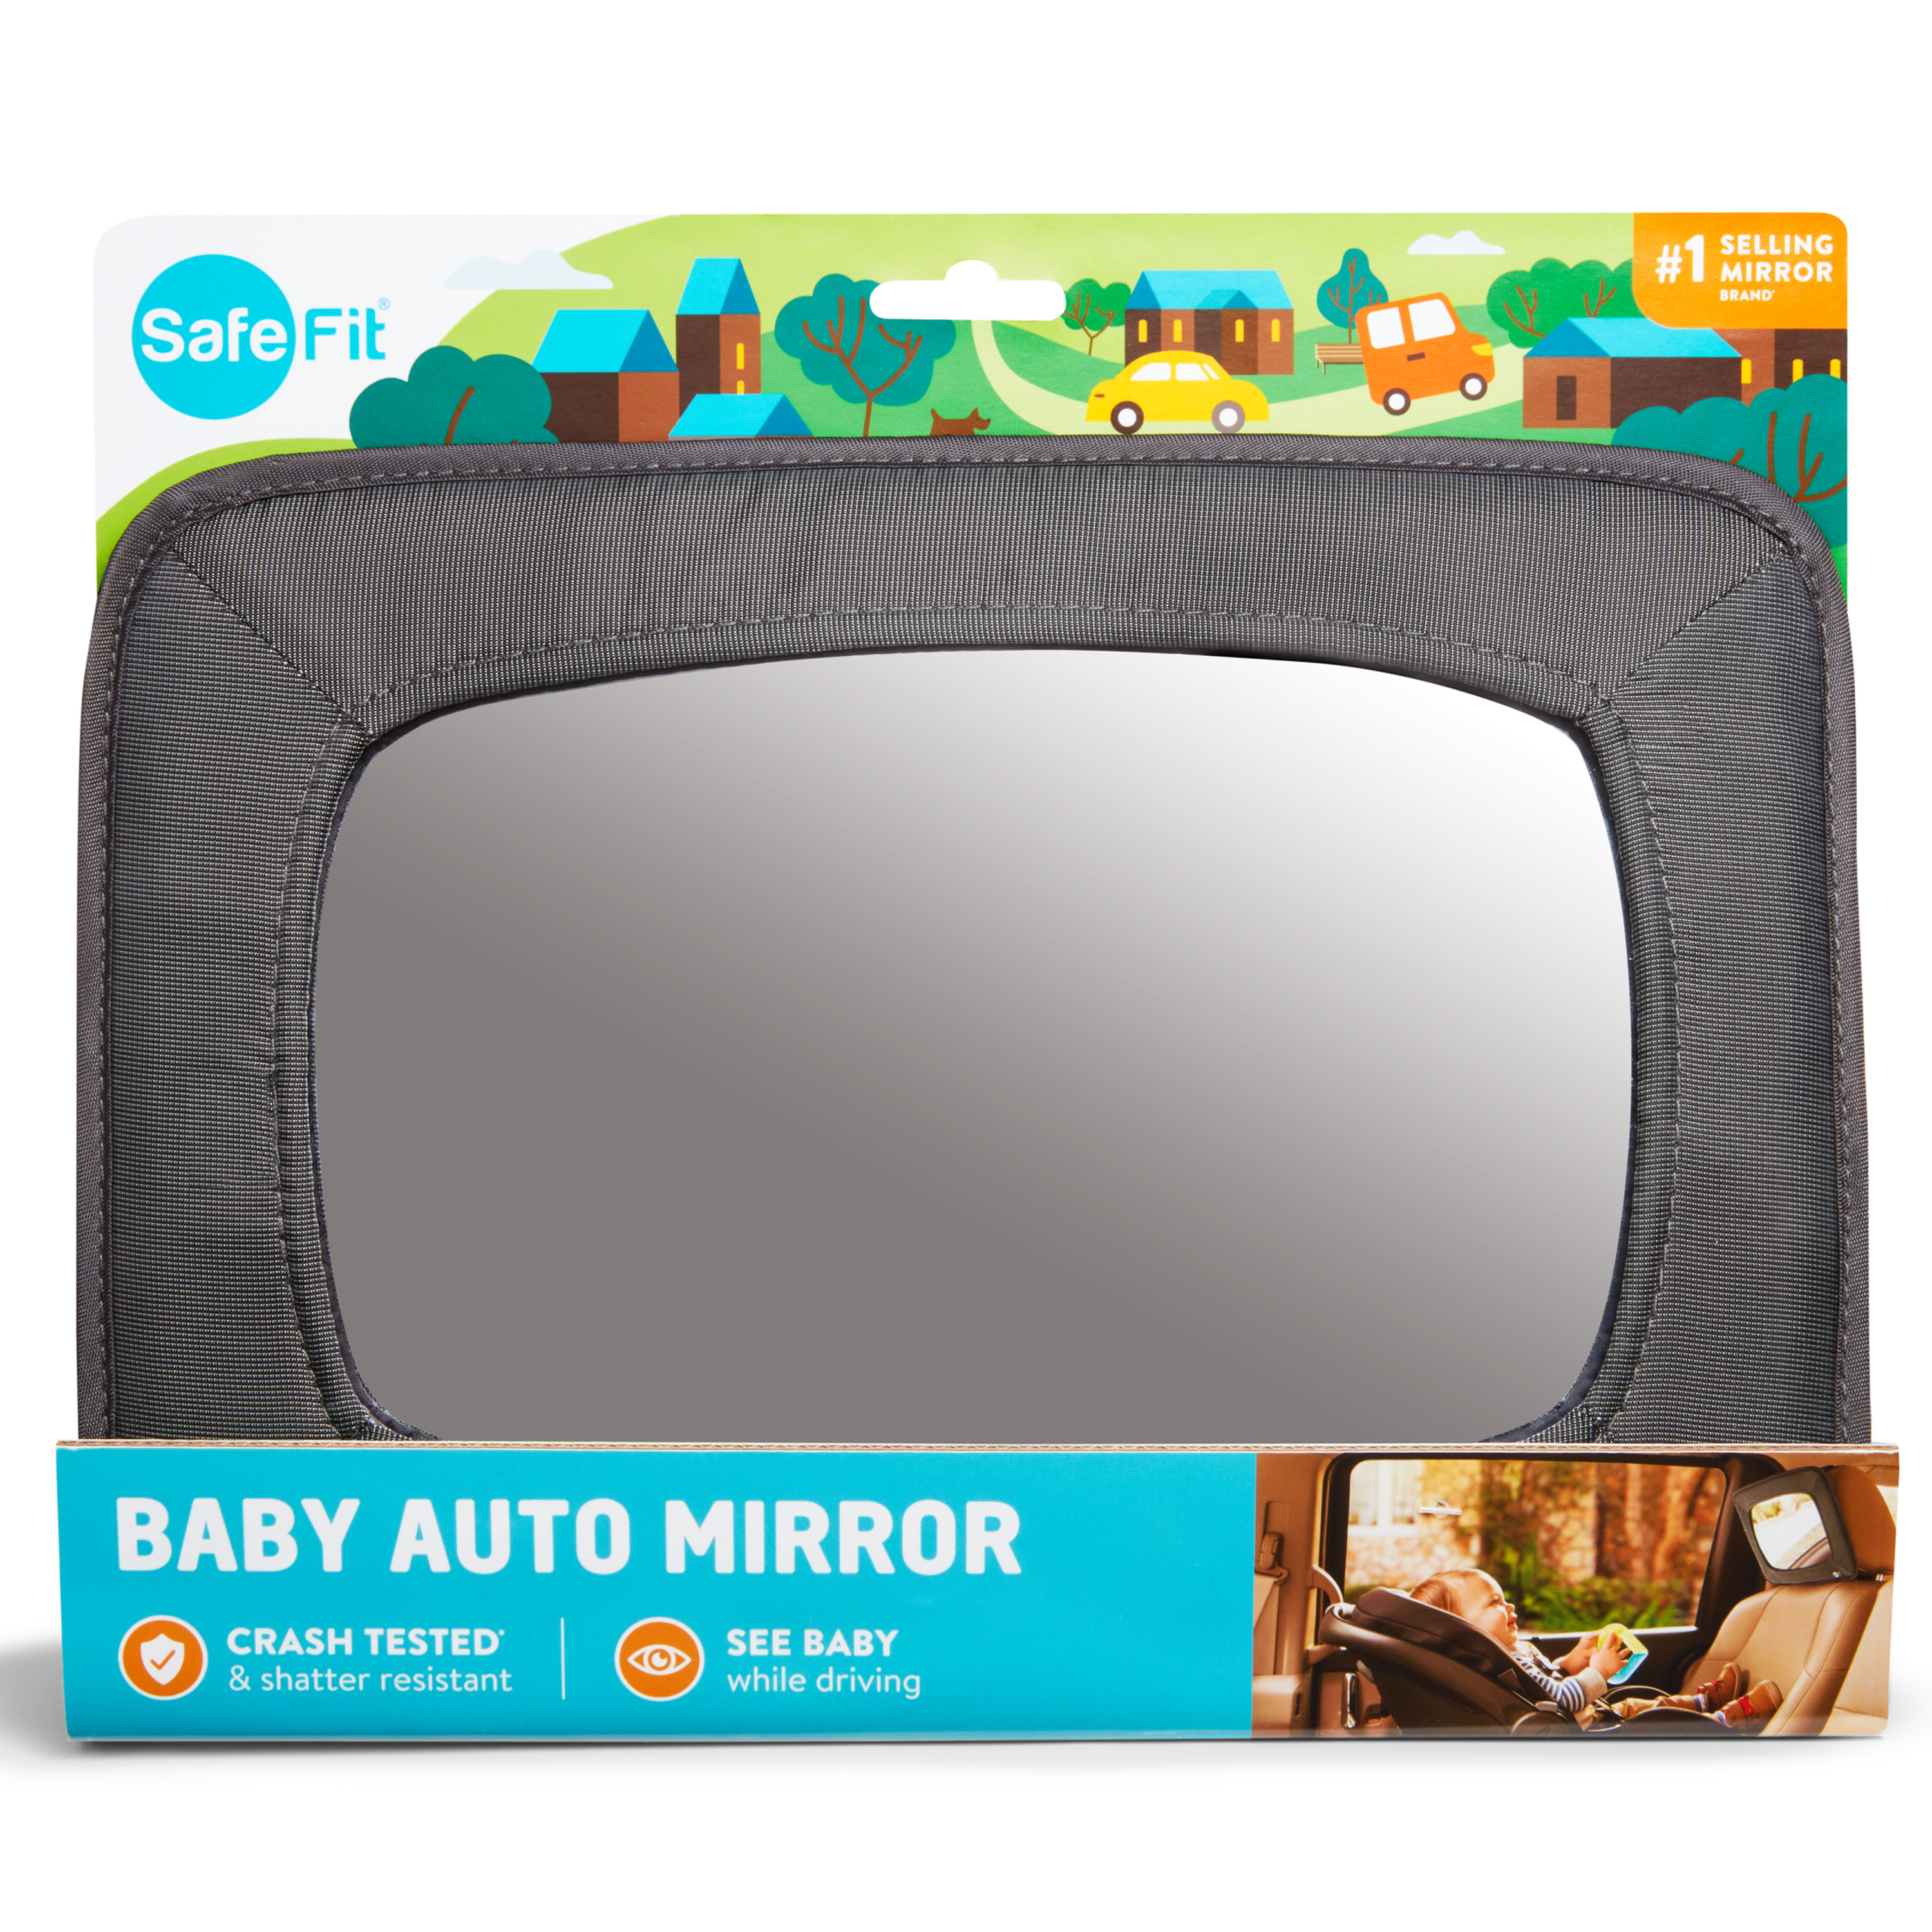 SafeFit® Wide View Baby Car Mirror, Crash-Tested, Gray, Unisex - image 5 of 5